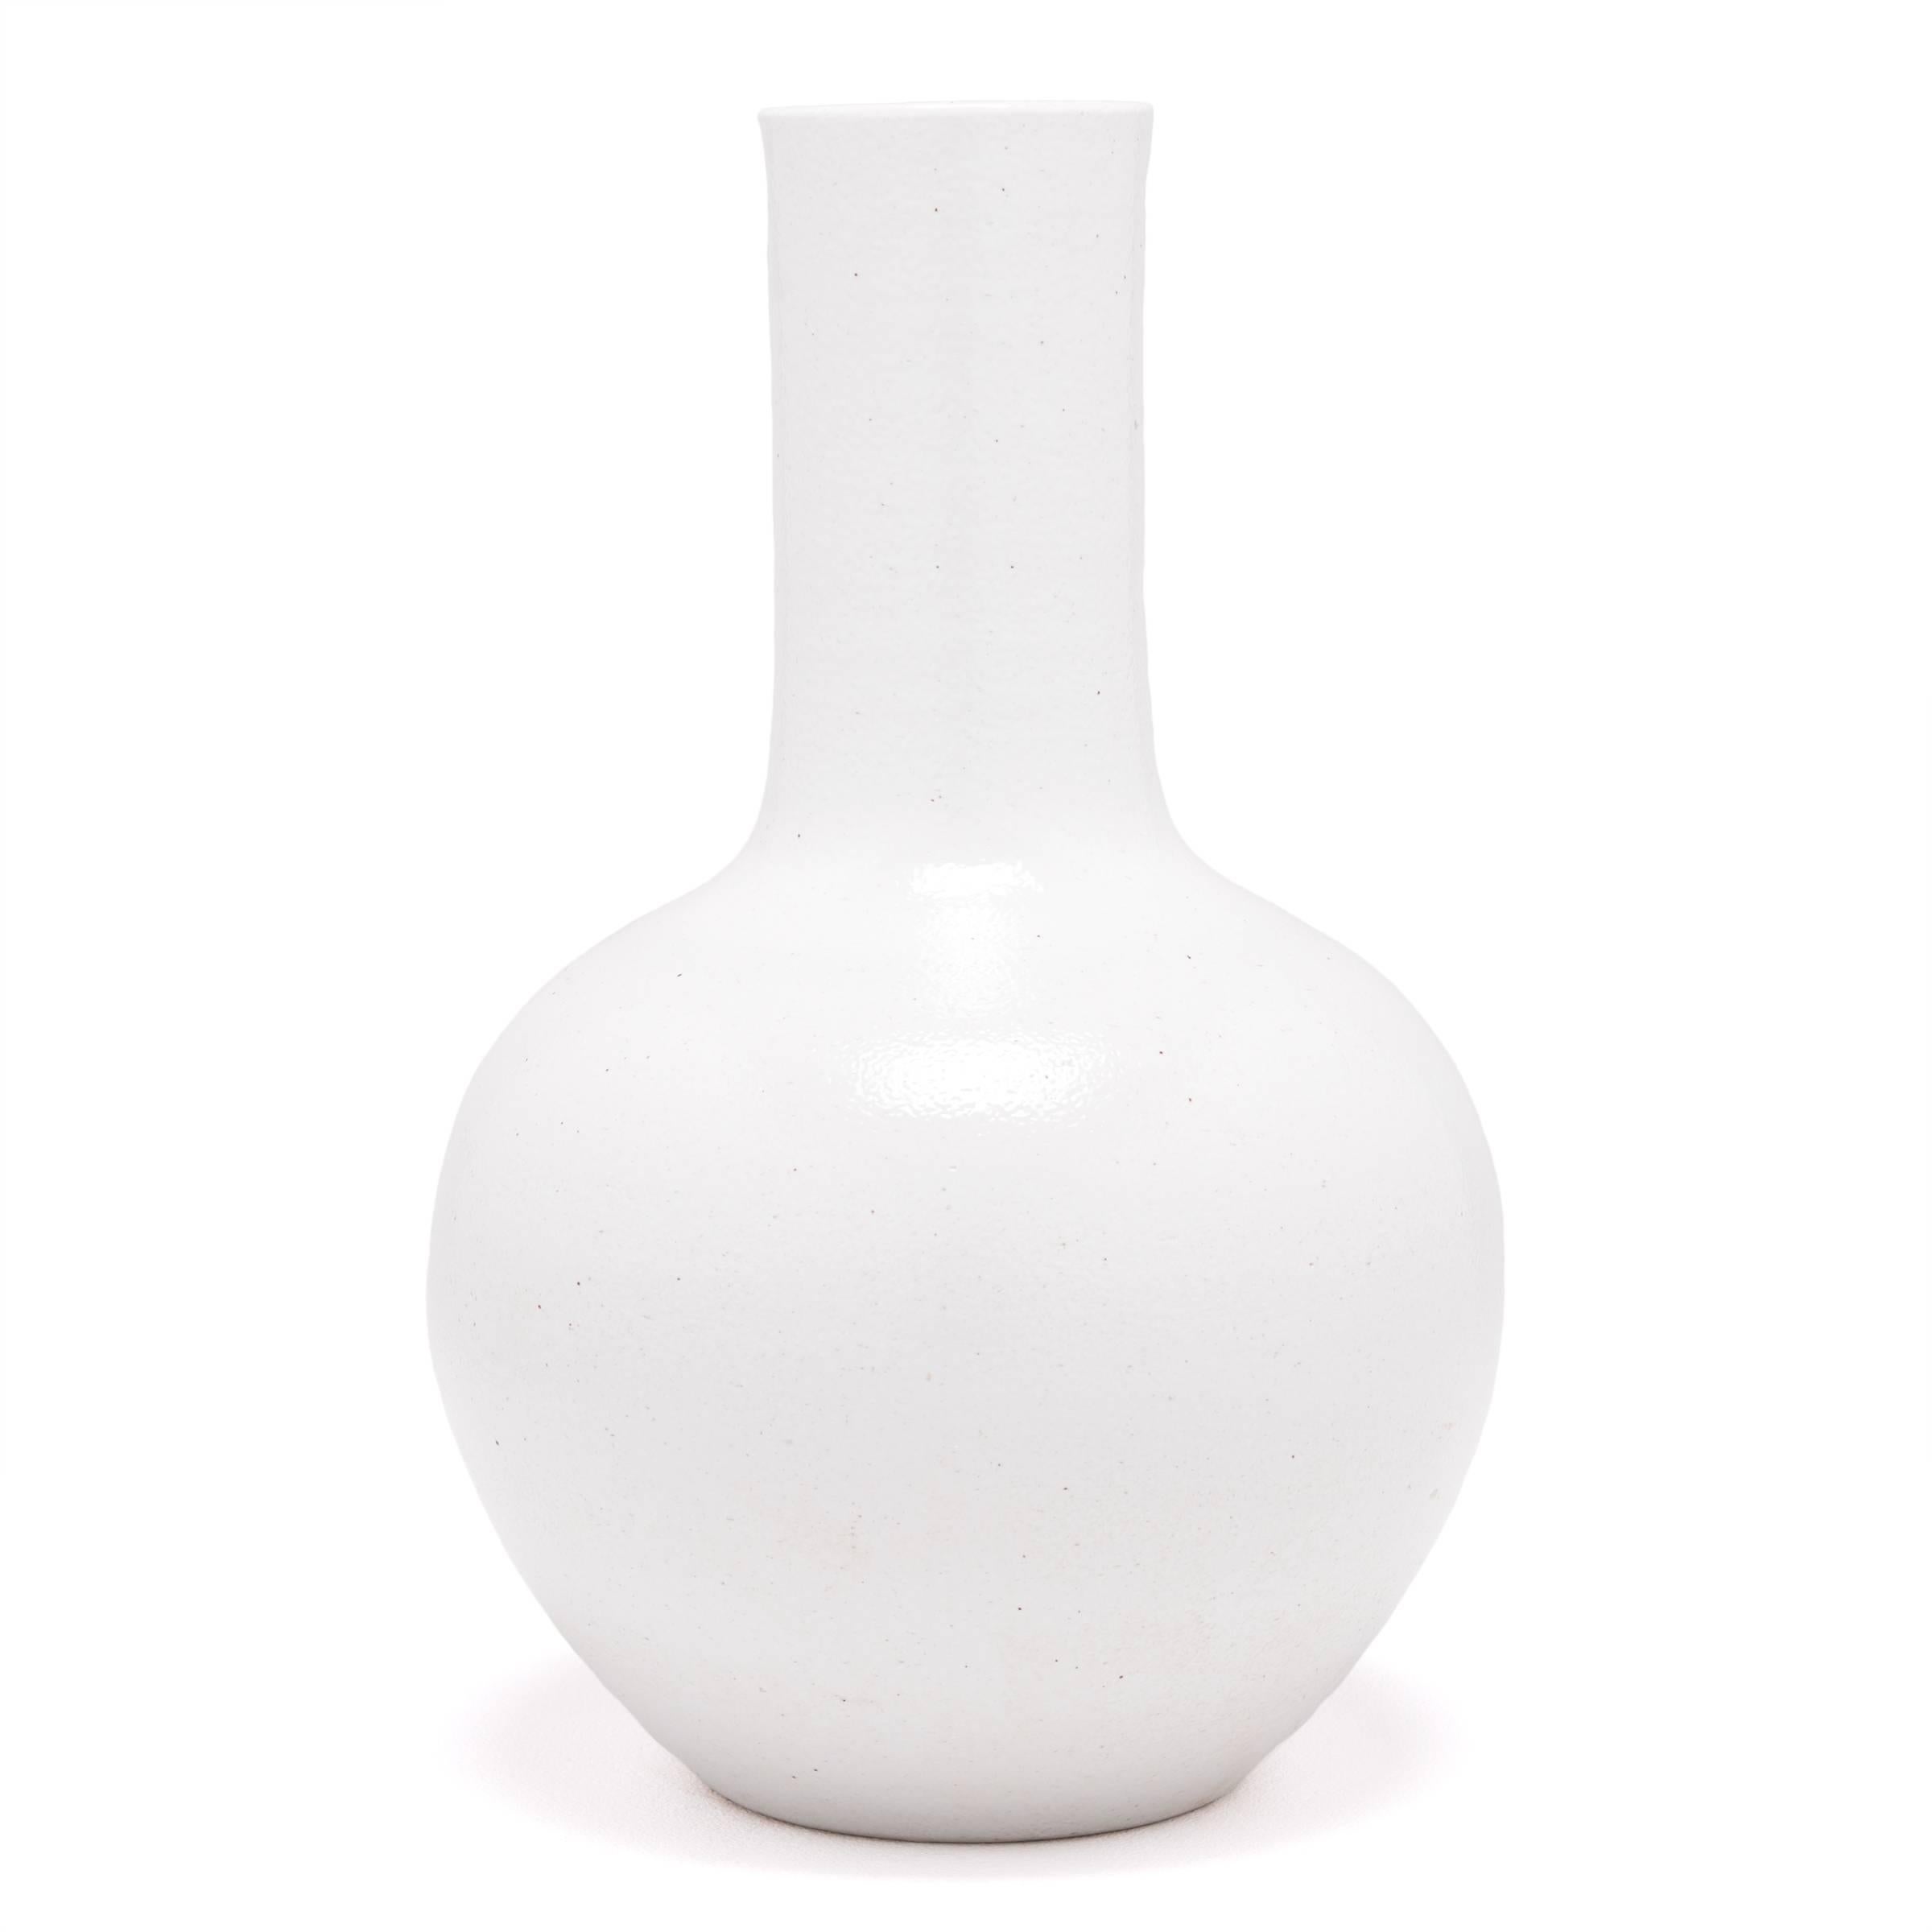 Drawing on a long Chinese tradition of monochrome ceramics, this austere long-necked vase is glazed in serene, cloud-inspired white. Crafted in in Jiangxi province, local ceramists reinterpreted this very traditional shape with clean lines and an